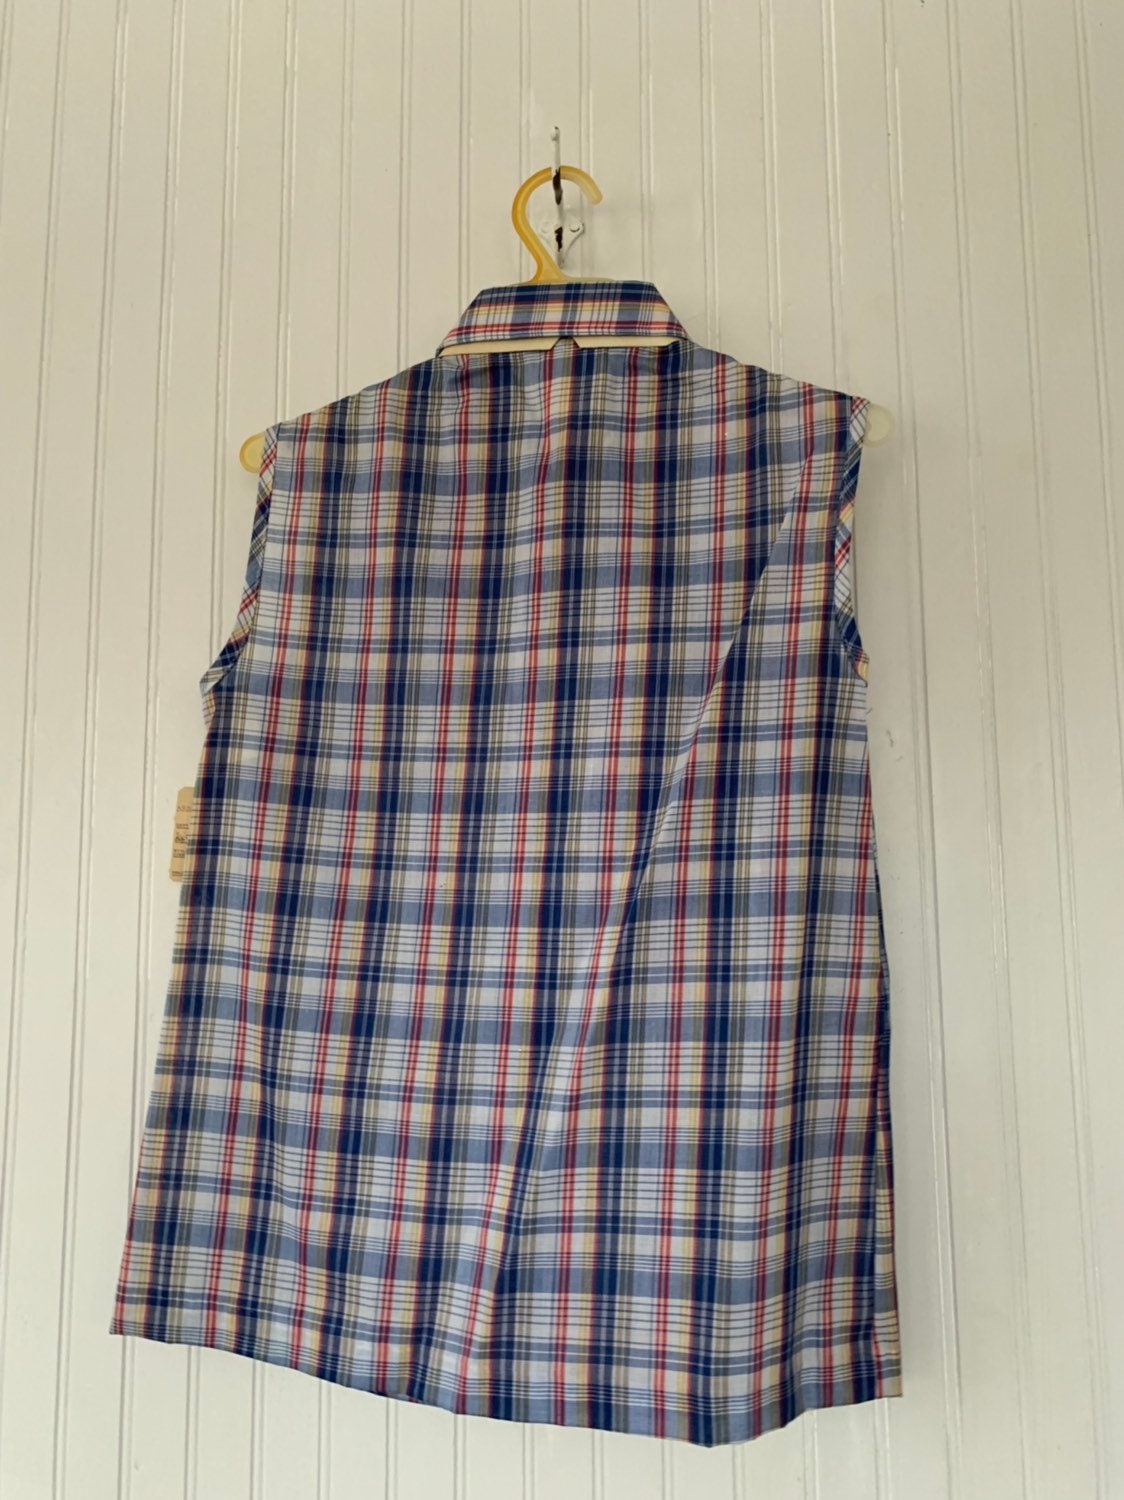 NWT 80s Vintage Plaid Sleeveless Top Size XS Small Blue Red White ...